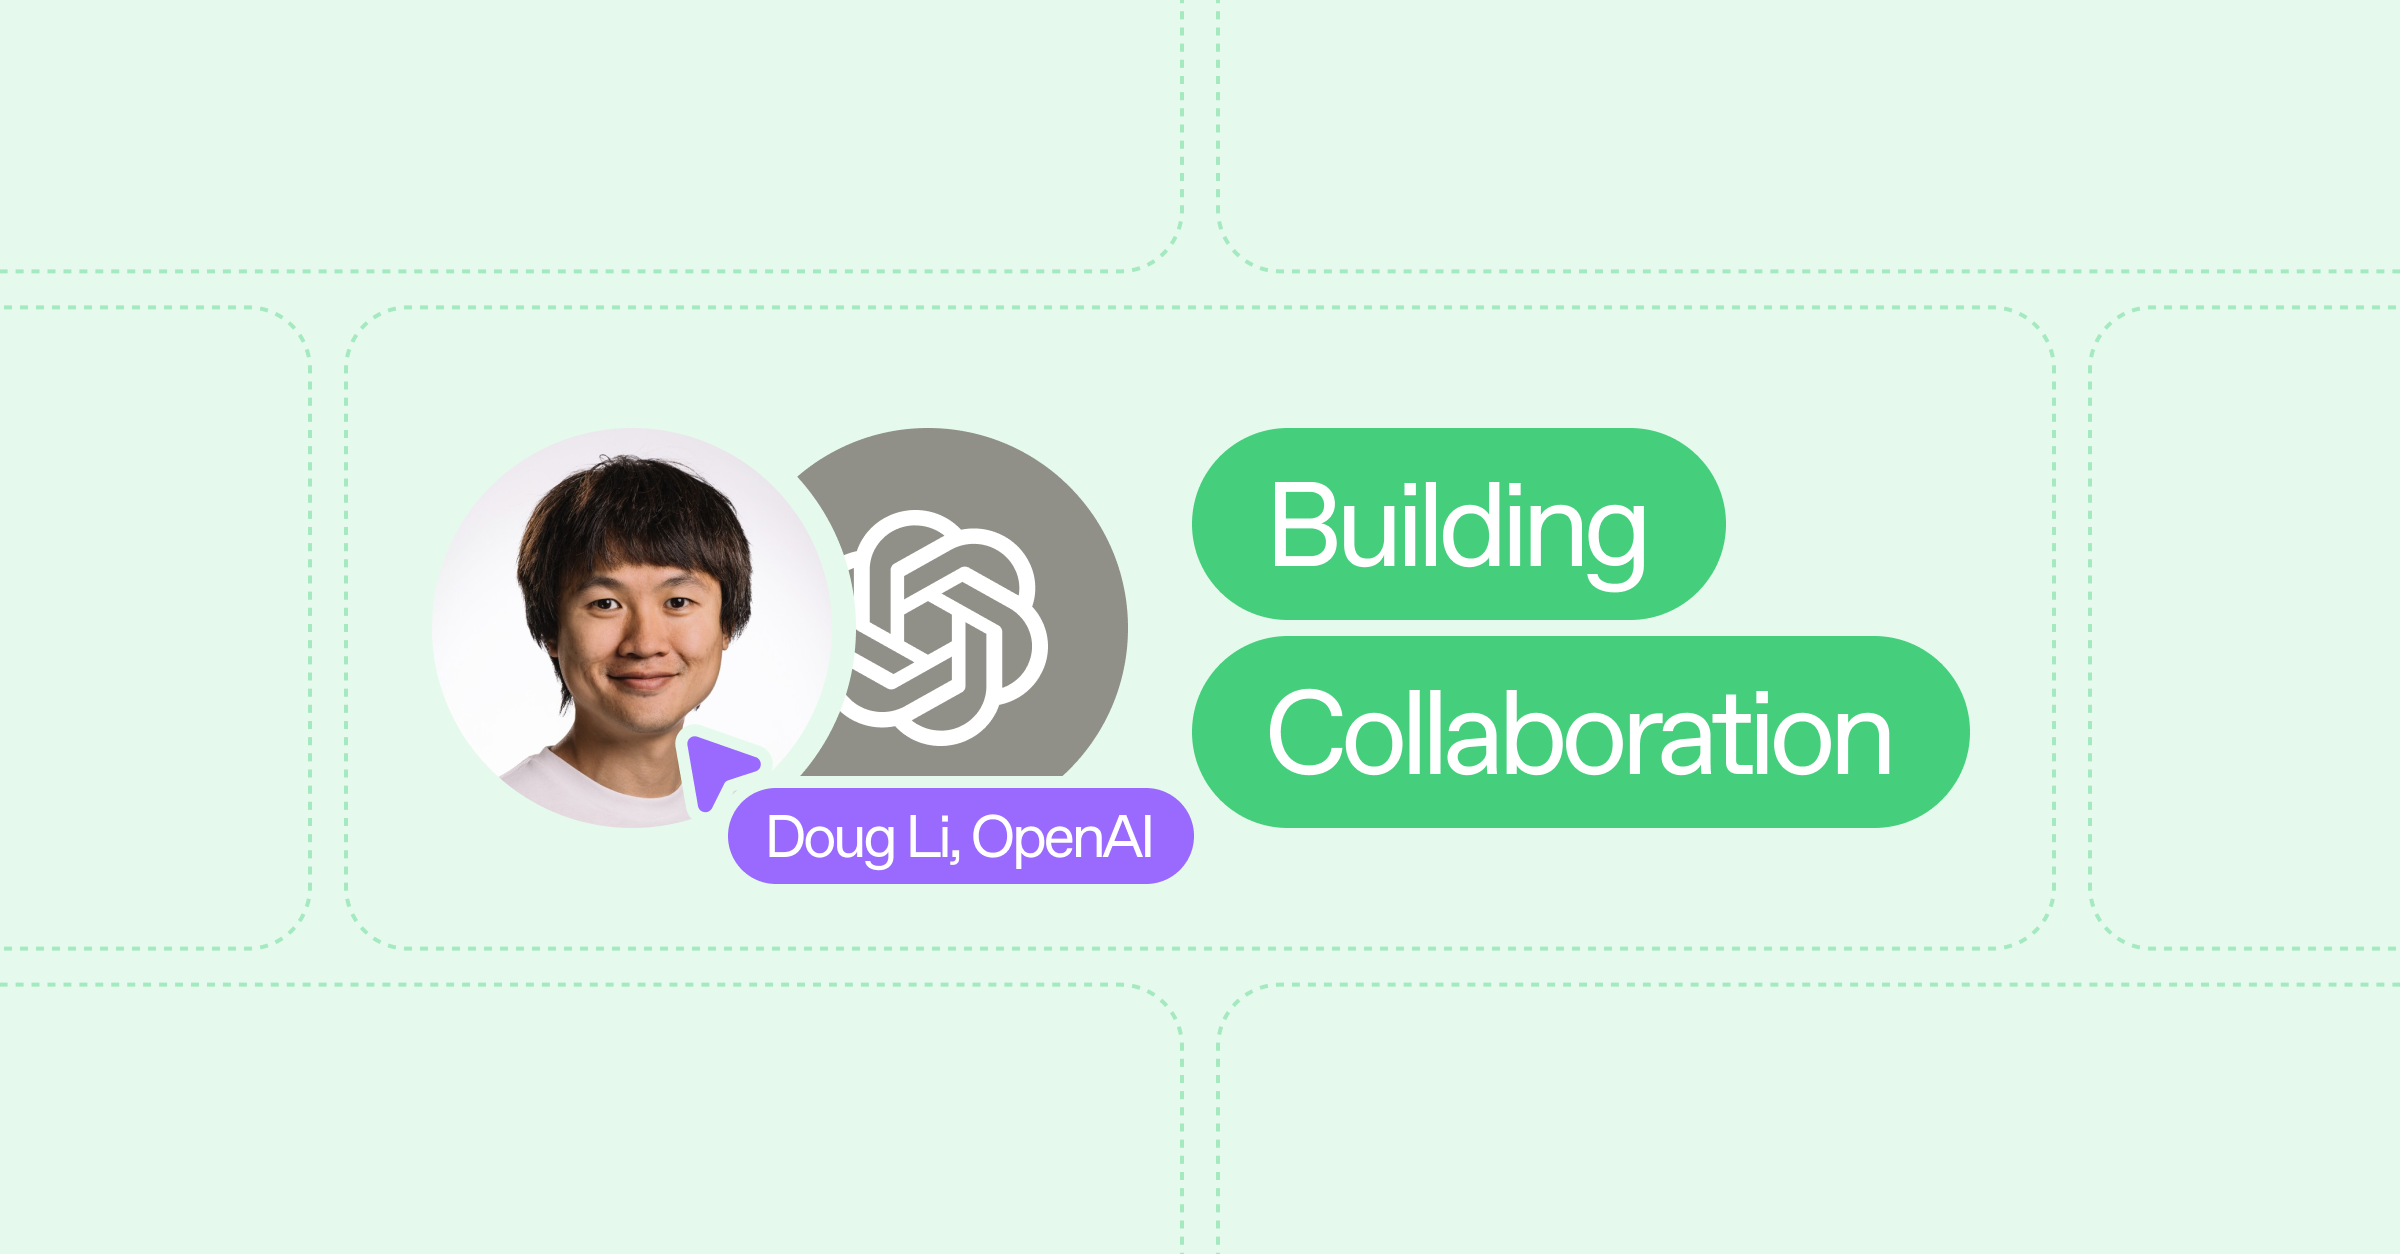 Image of Doug Li in a presence facepile next to the title "Building Collaboration" 